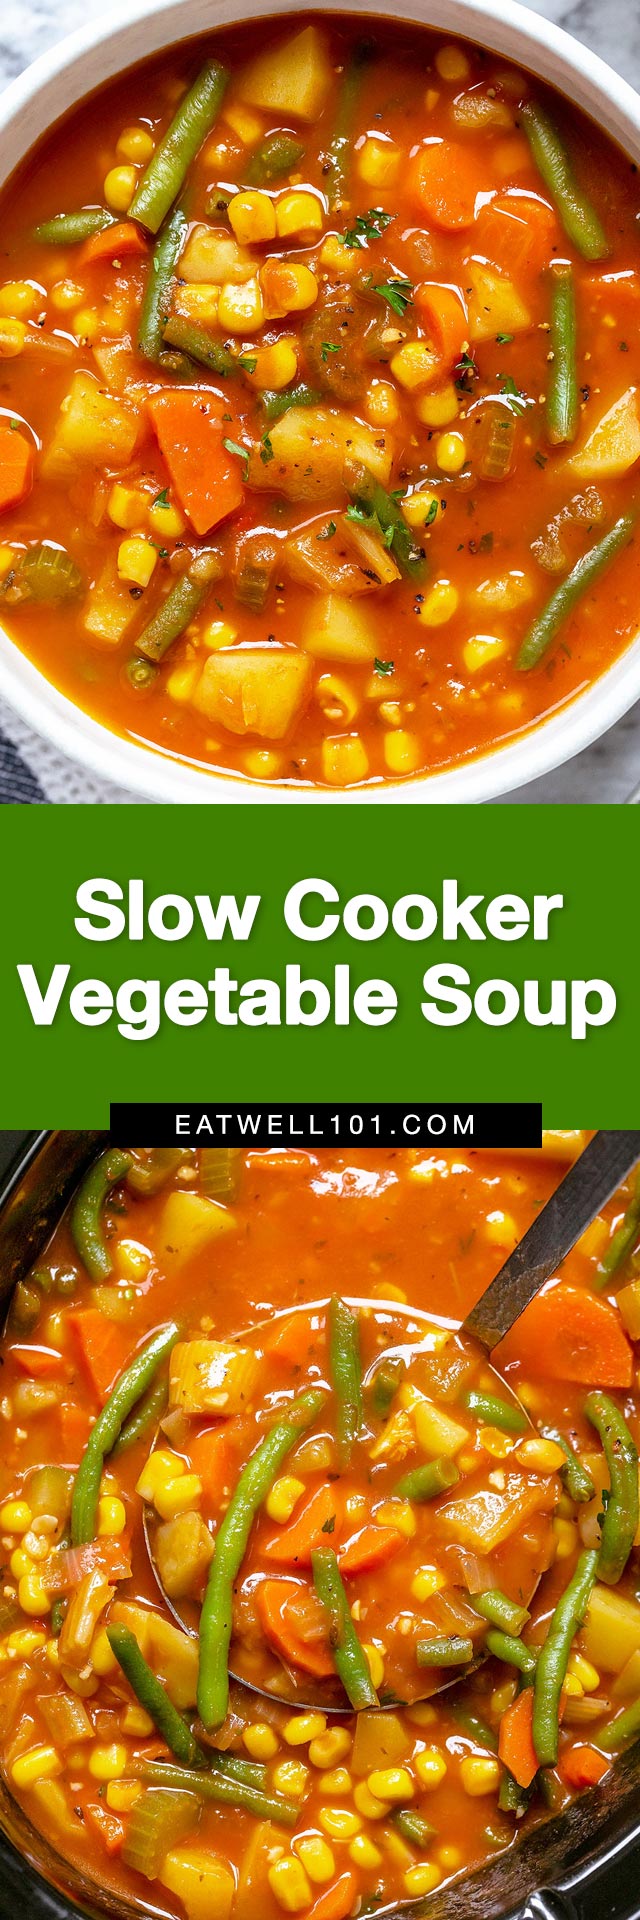 Slow Cooker Vegetable Soup - #vegetable #soup #recipe #slowcooker #eatwell101 - Enjoy Slow Cooker Vegetable Soup Recipe for an easy dinner. Throw everything into the crock pot for a veggie soup full of flavor! 